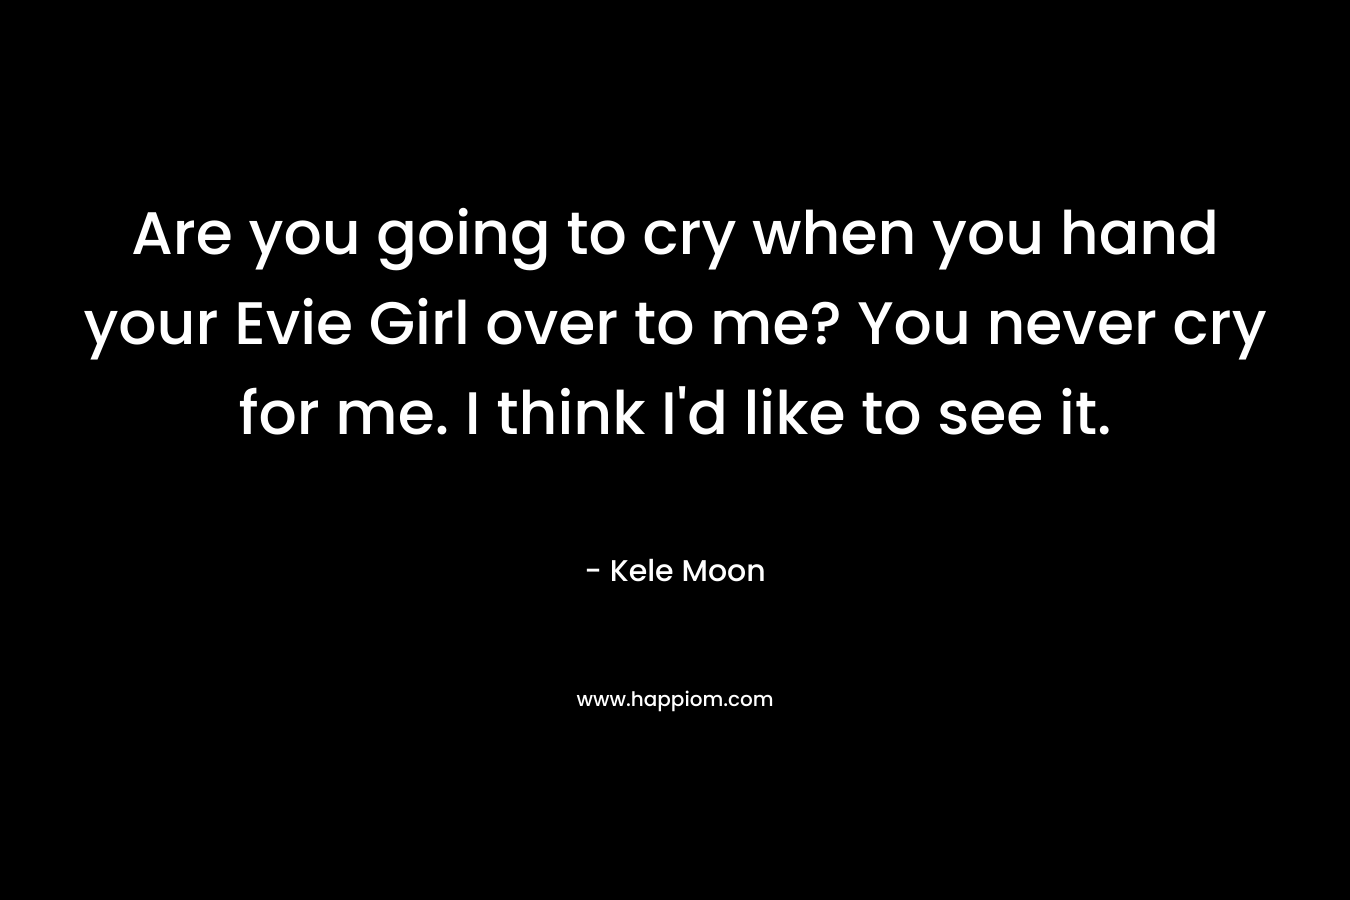 Are you going to cry when you hand your Evie Girl over to me? You never cry for me. I think I'd like to see it.